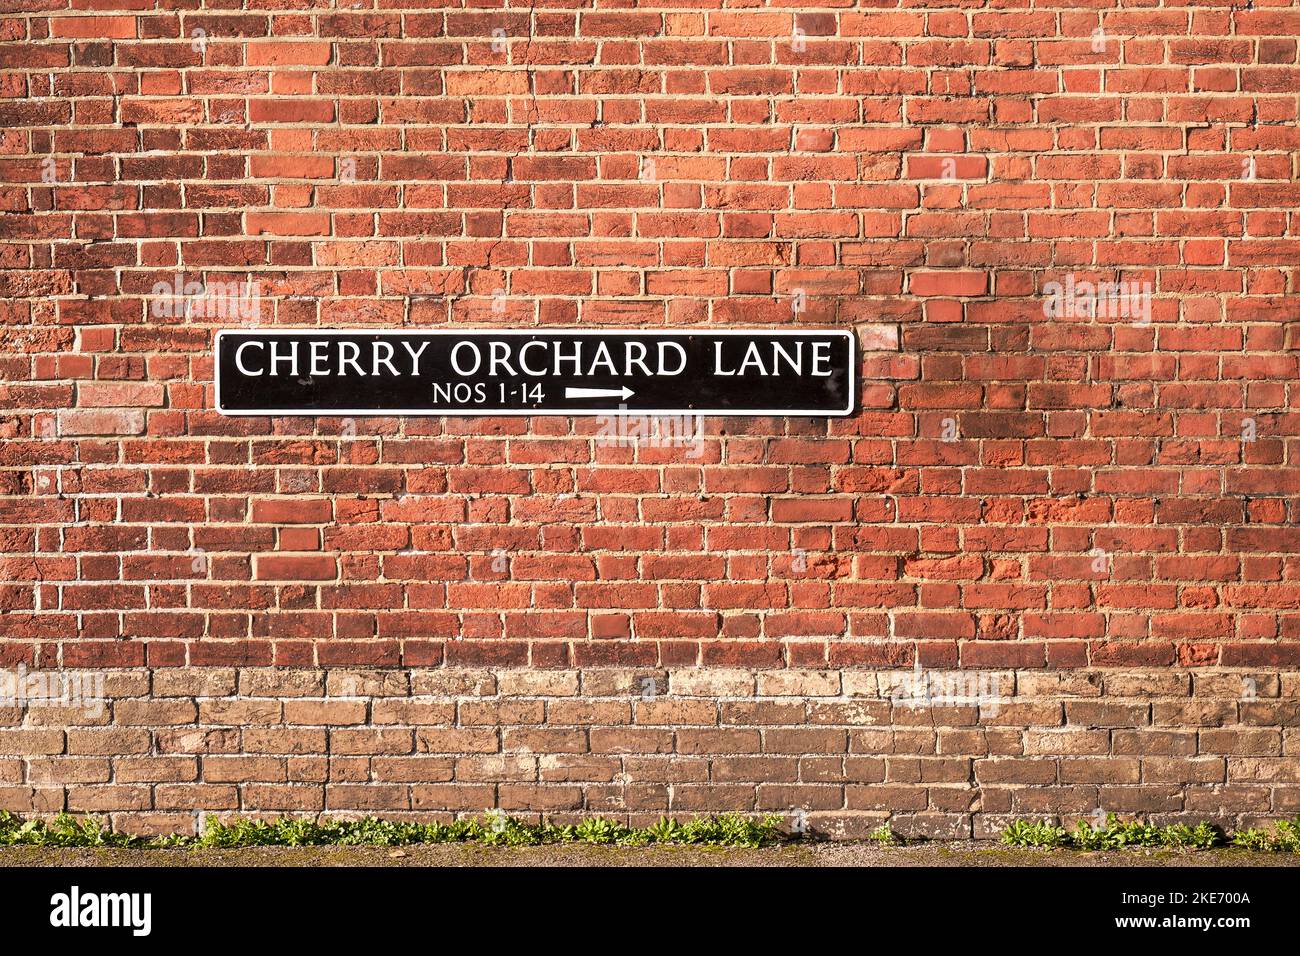 Cherry orchard lane street name sign on red brick wall Stock Photo